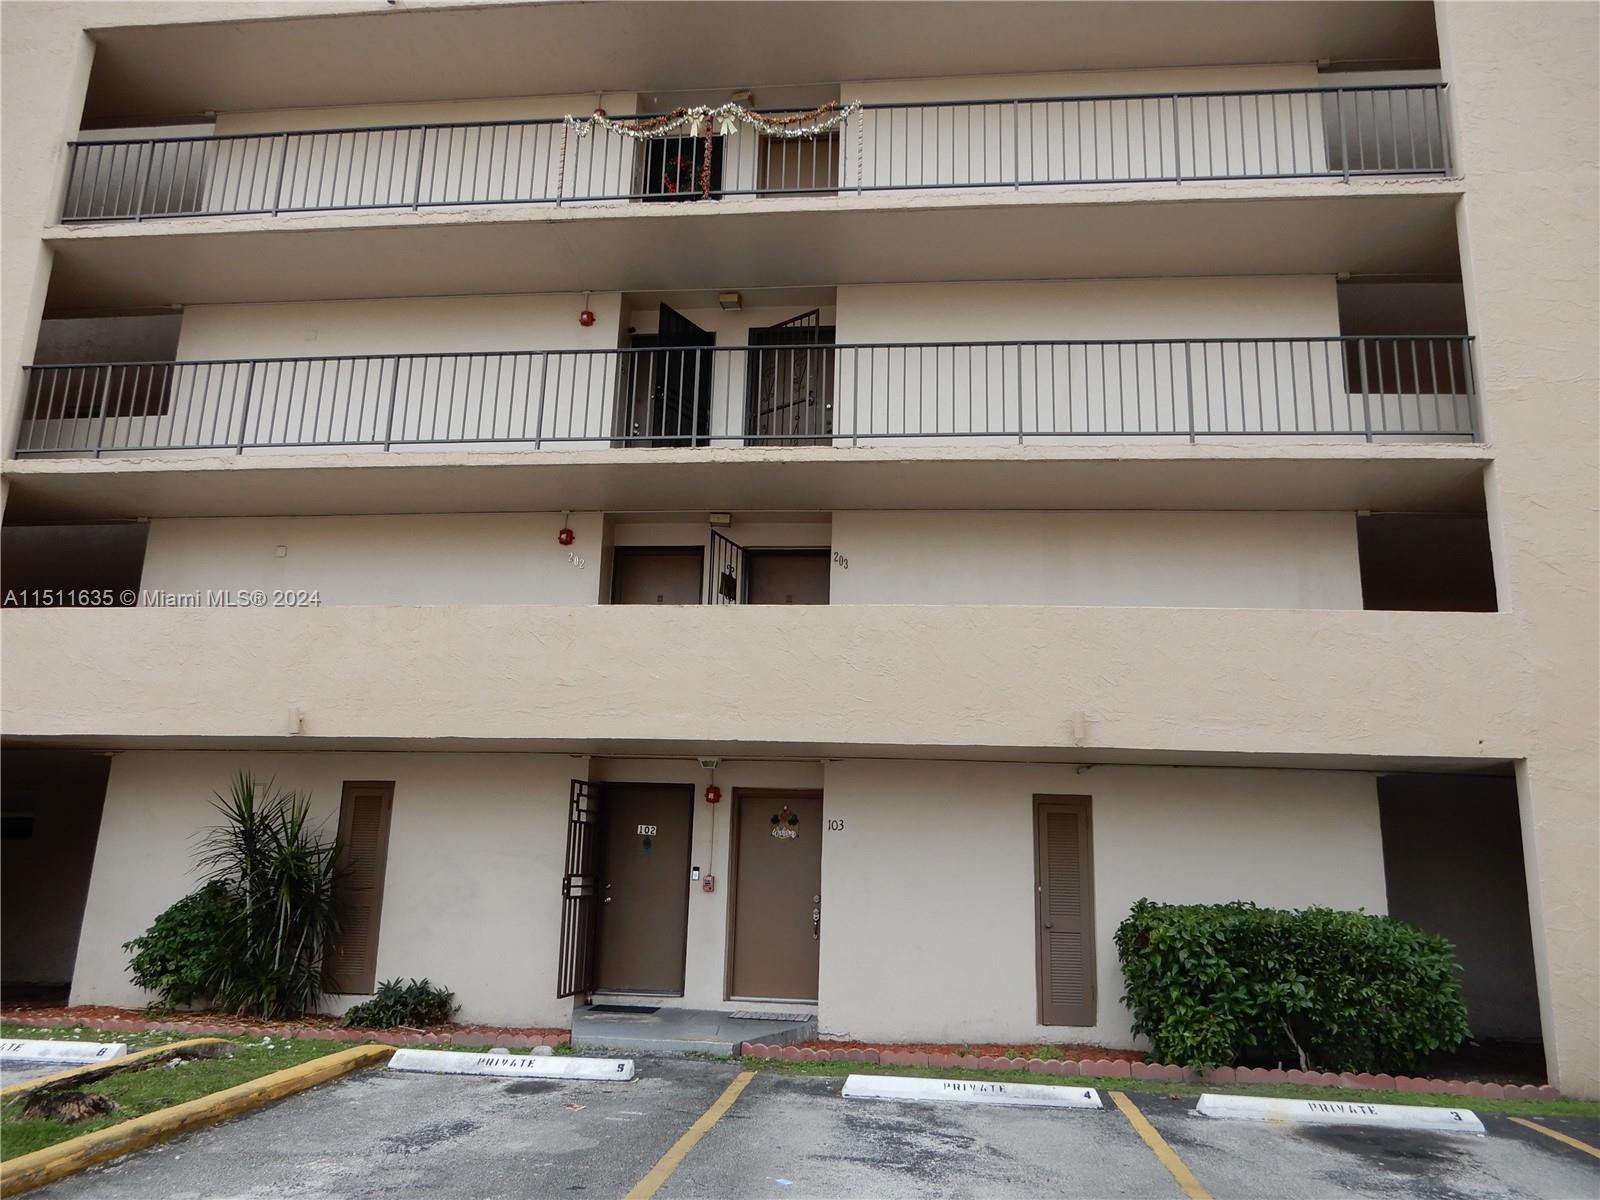 Photo of 870 NW 87th Ave #103 in Miami, FL